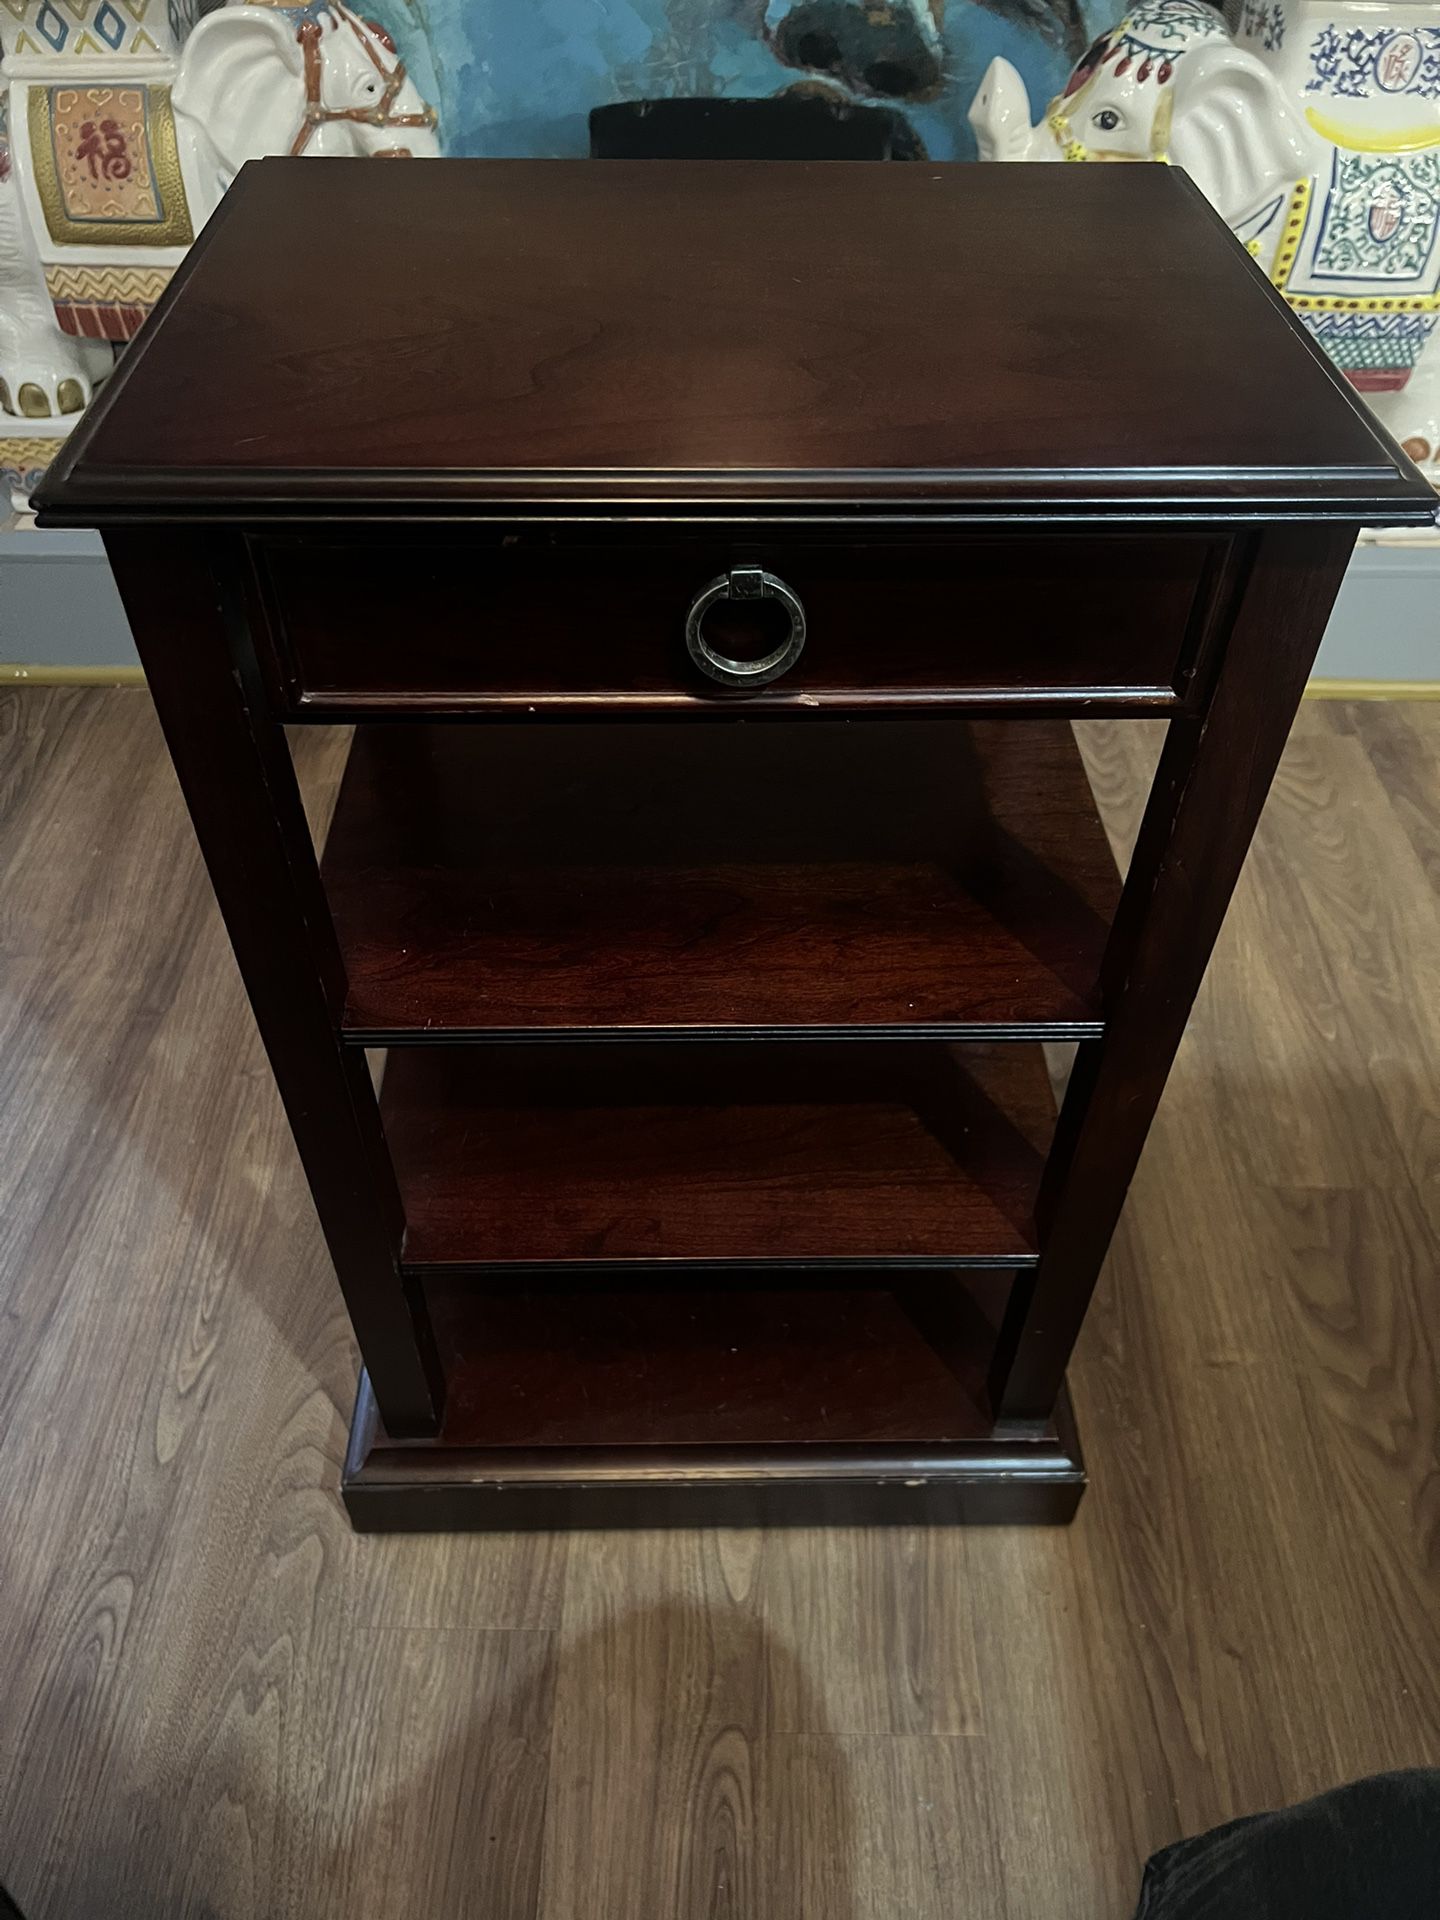 Mahogany Color End Table/nightstand 